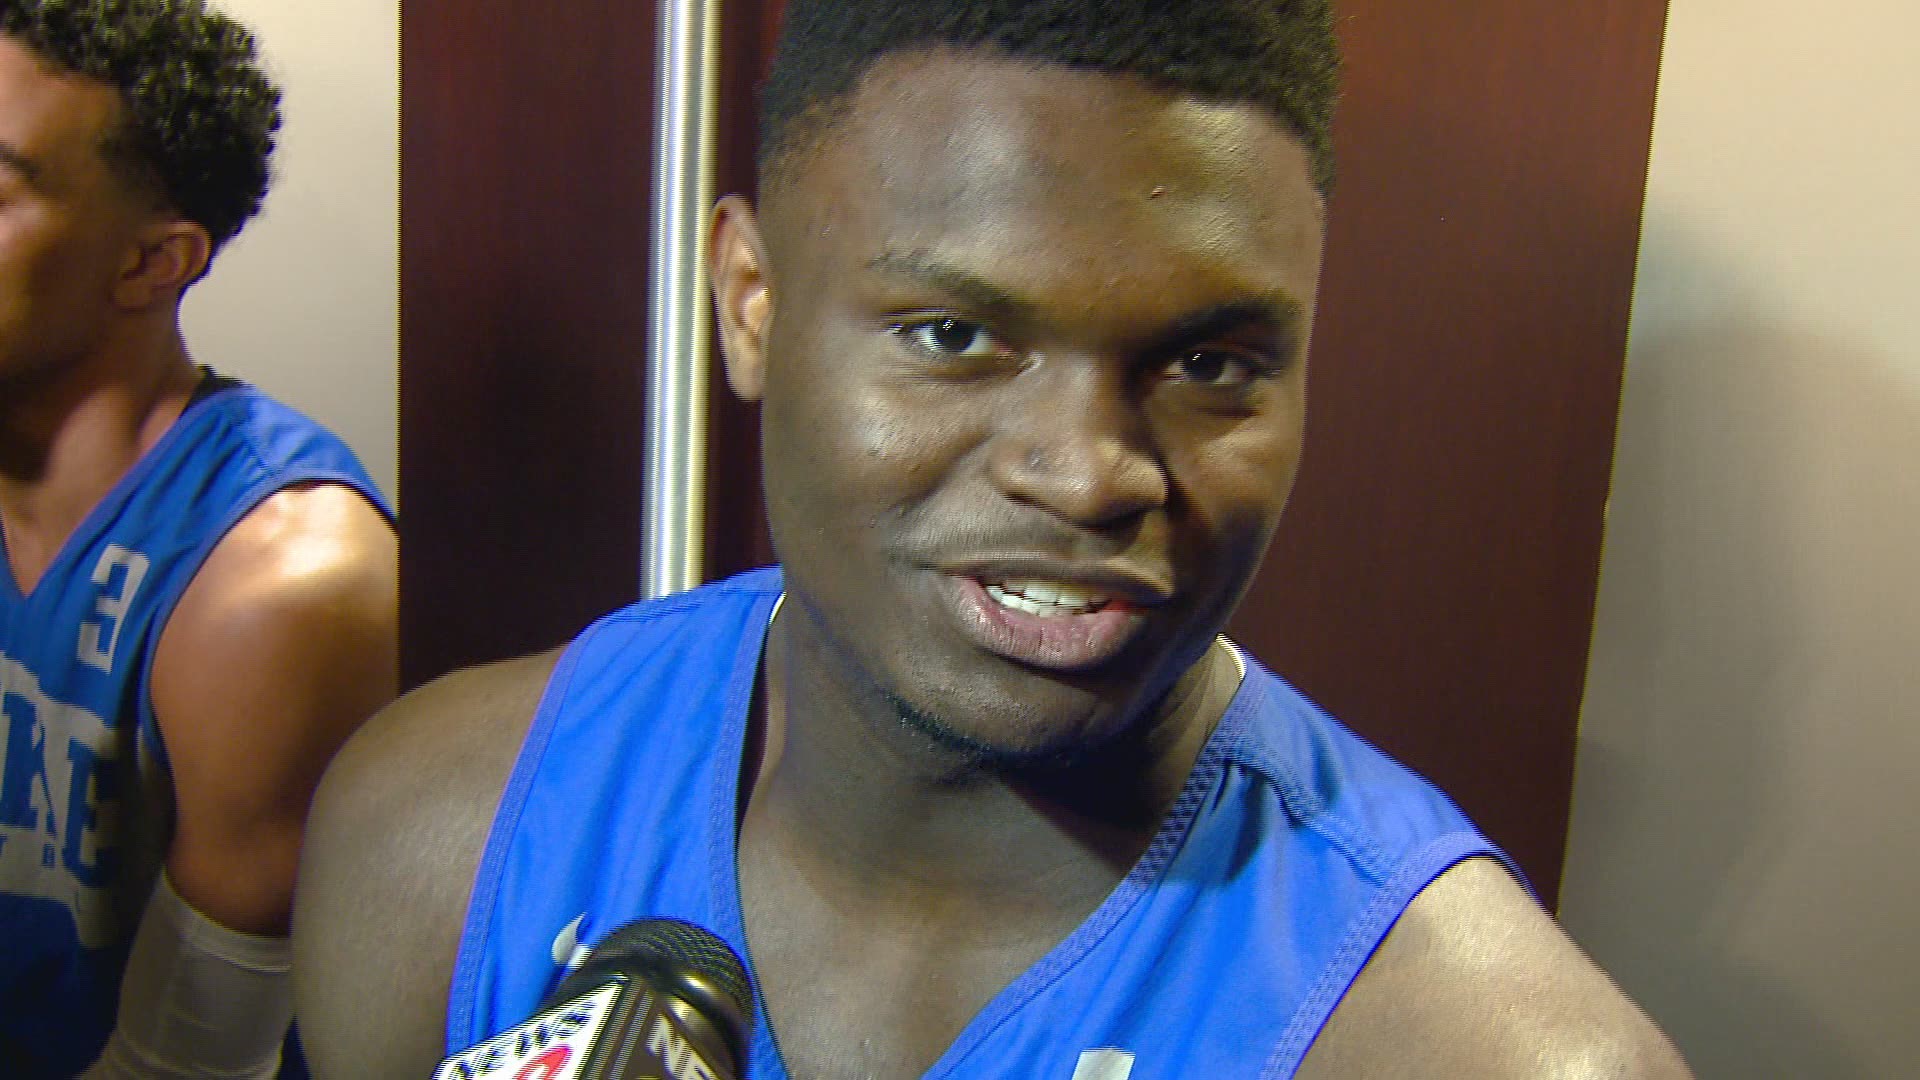 Zion Williamson gives some thoughts on Duke being the number one seed and playing in his first NCAA Tournament.